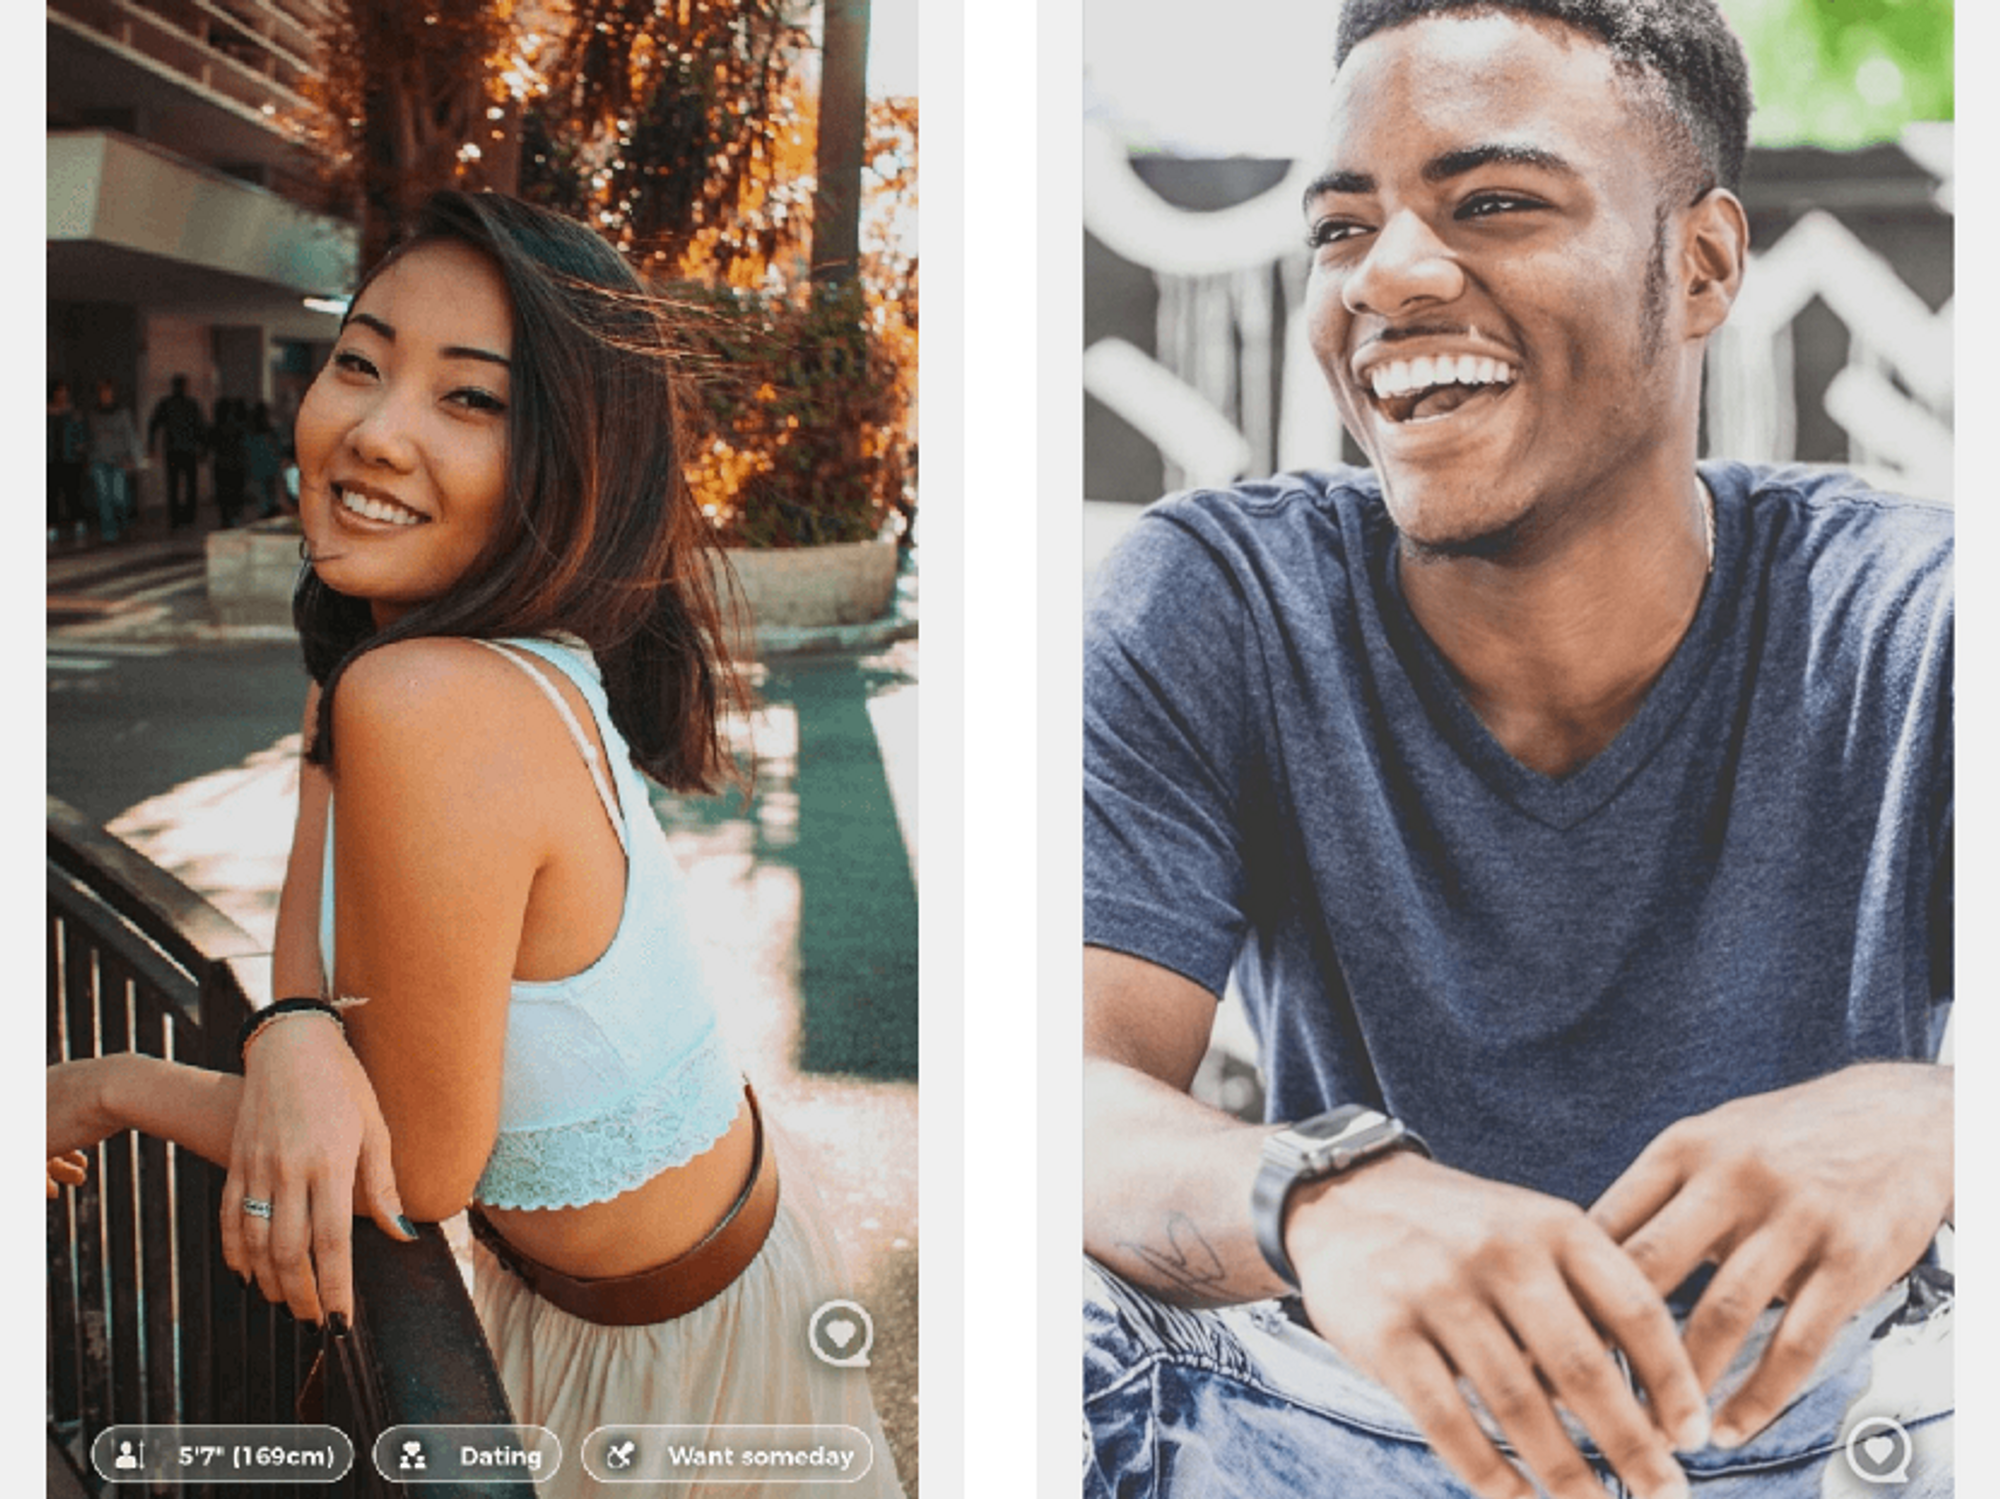 A New Hyperlocal Dating App Is Launching in LA